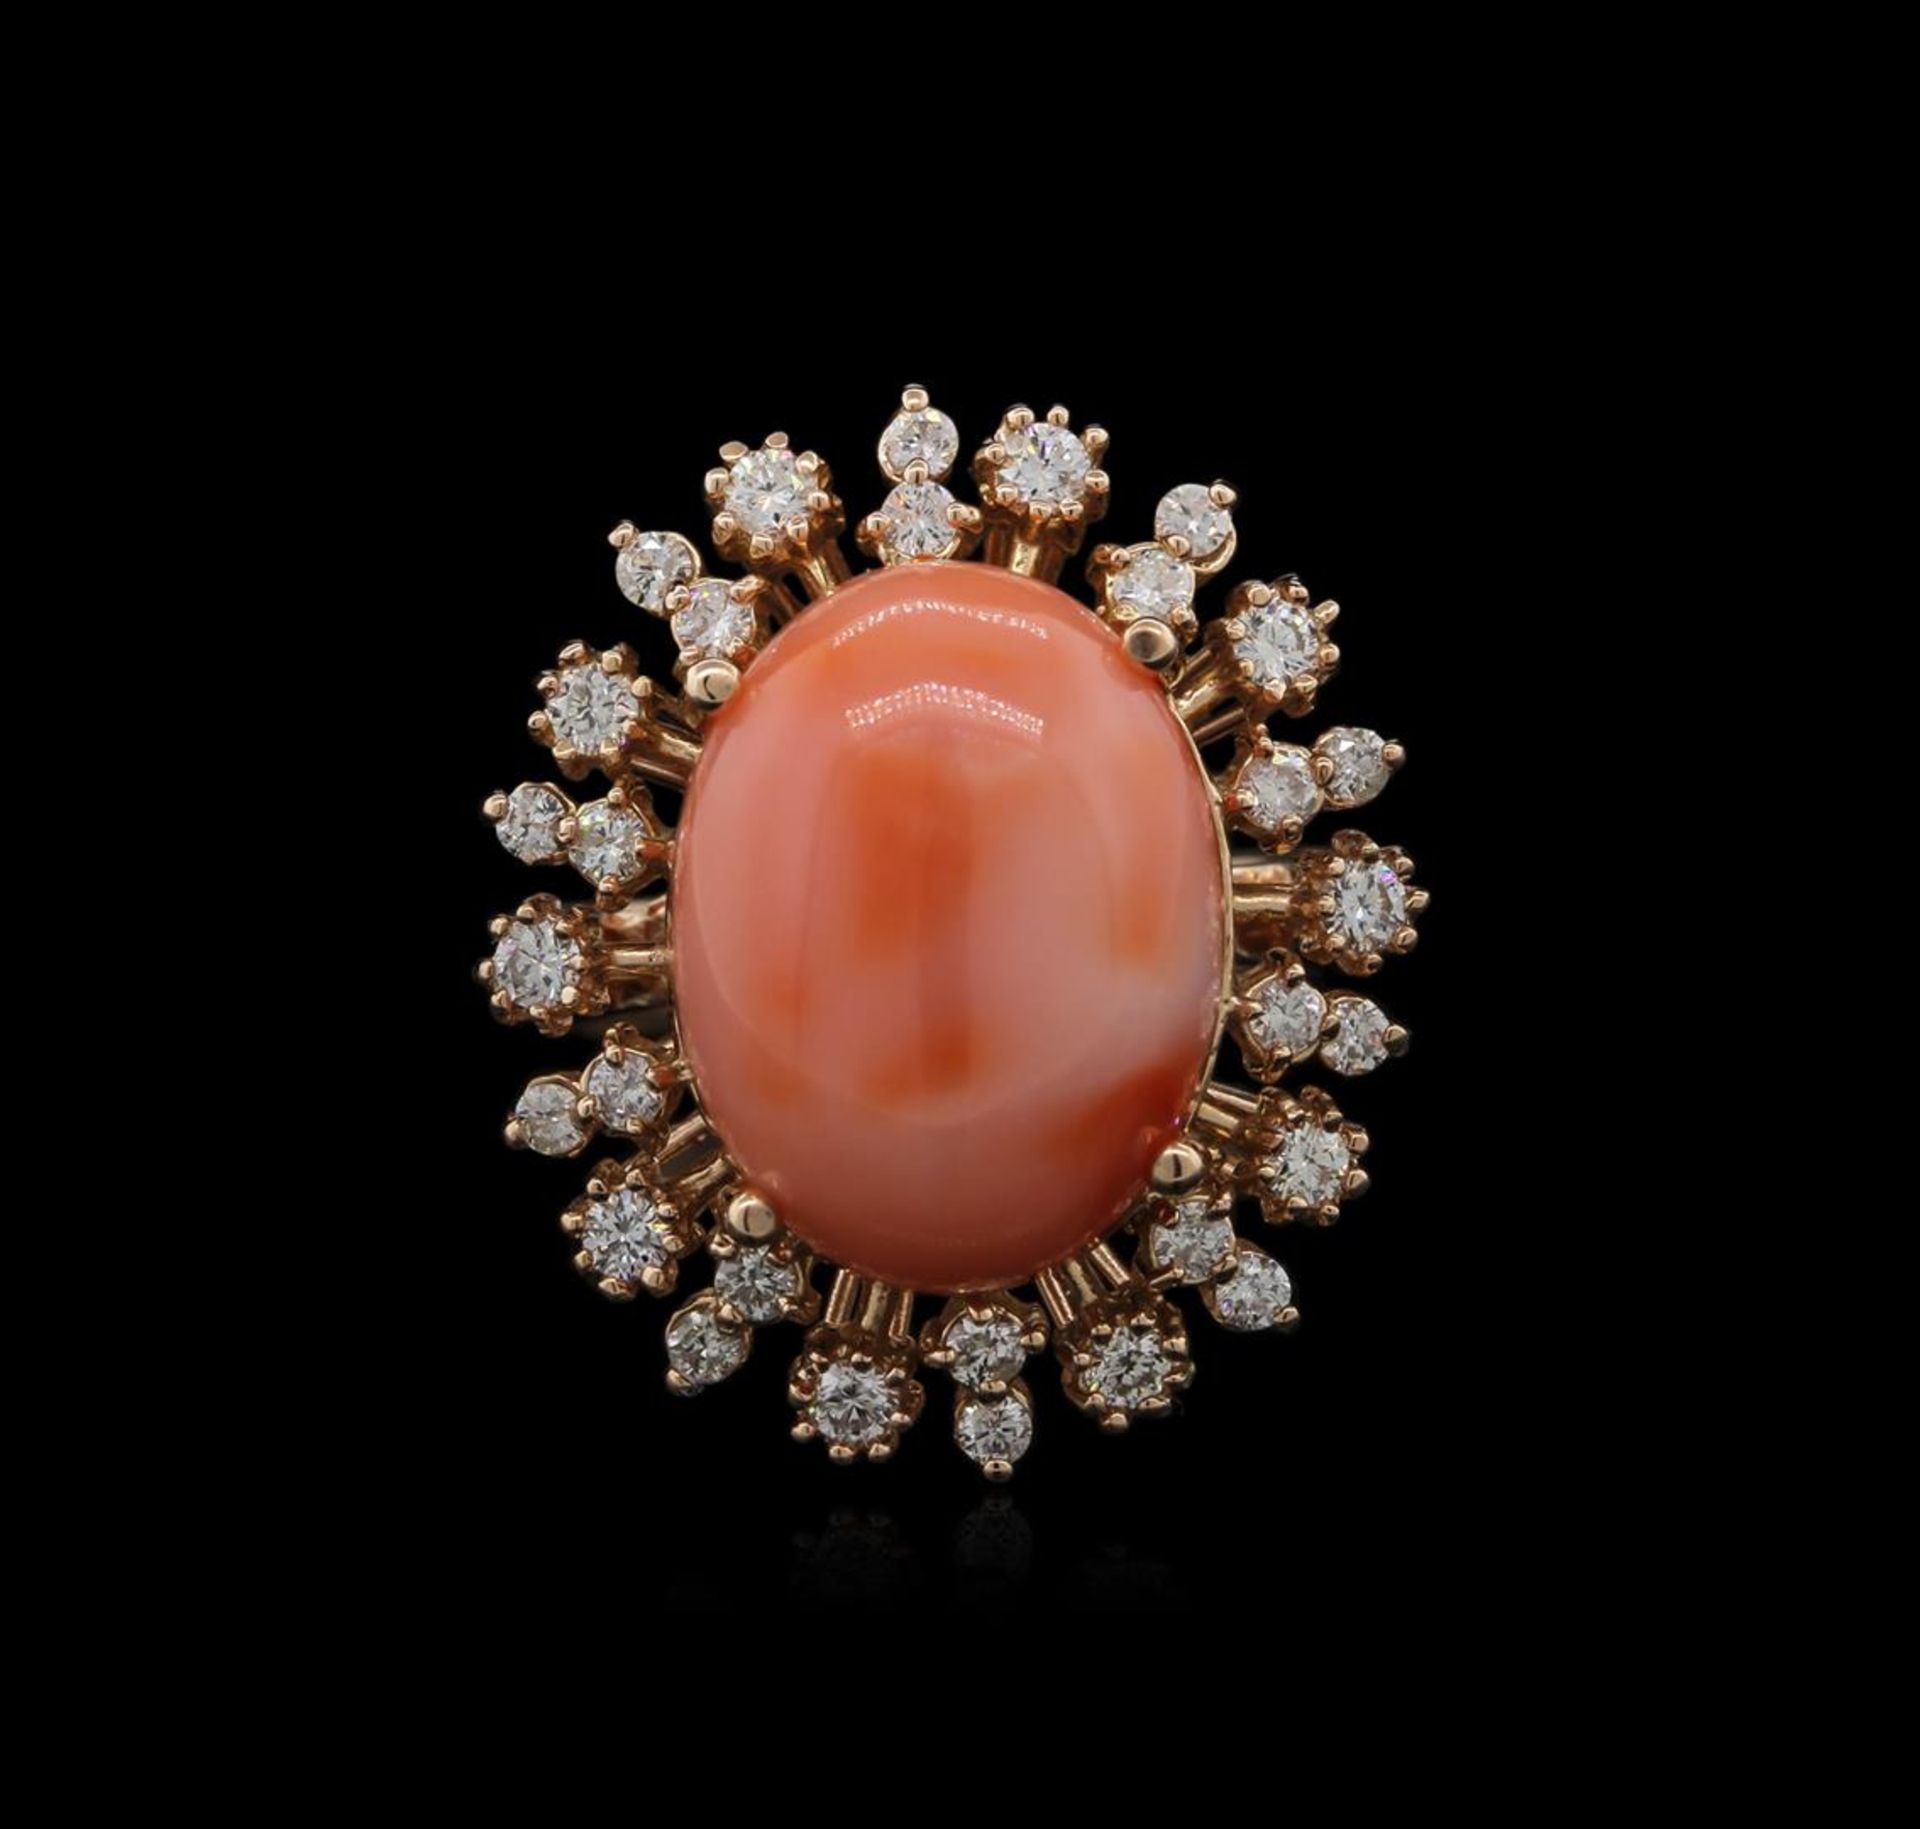 9.15 ctw Coral and Diamond Ring - 14KT Rose Gold - Image 2 of 2